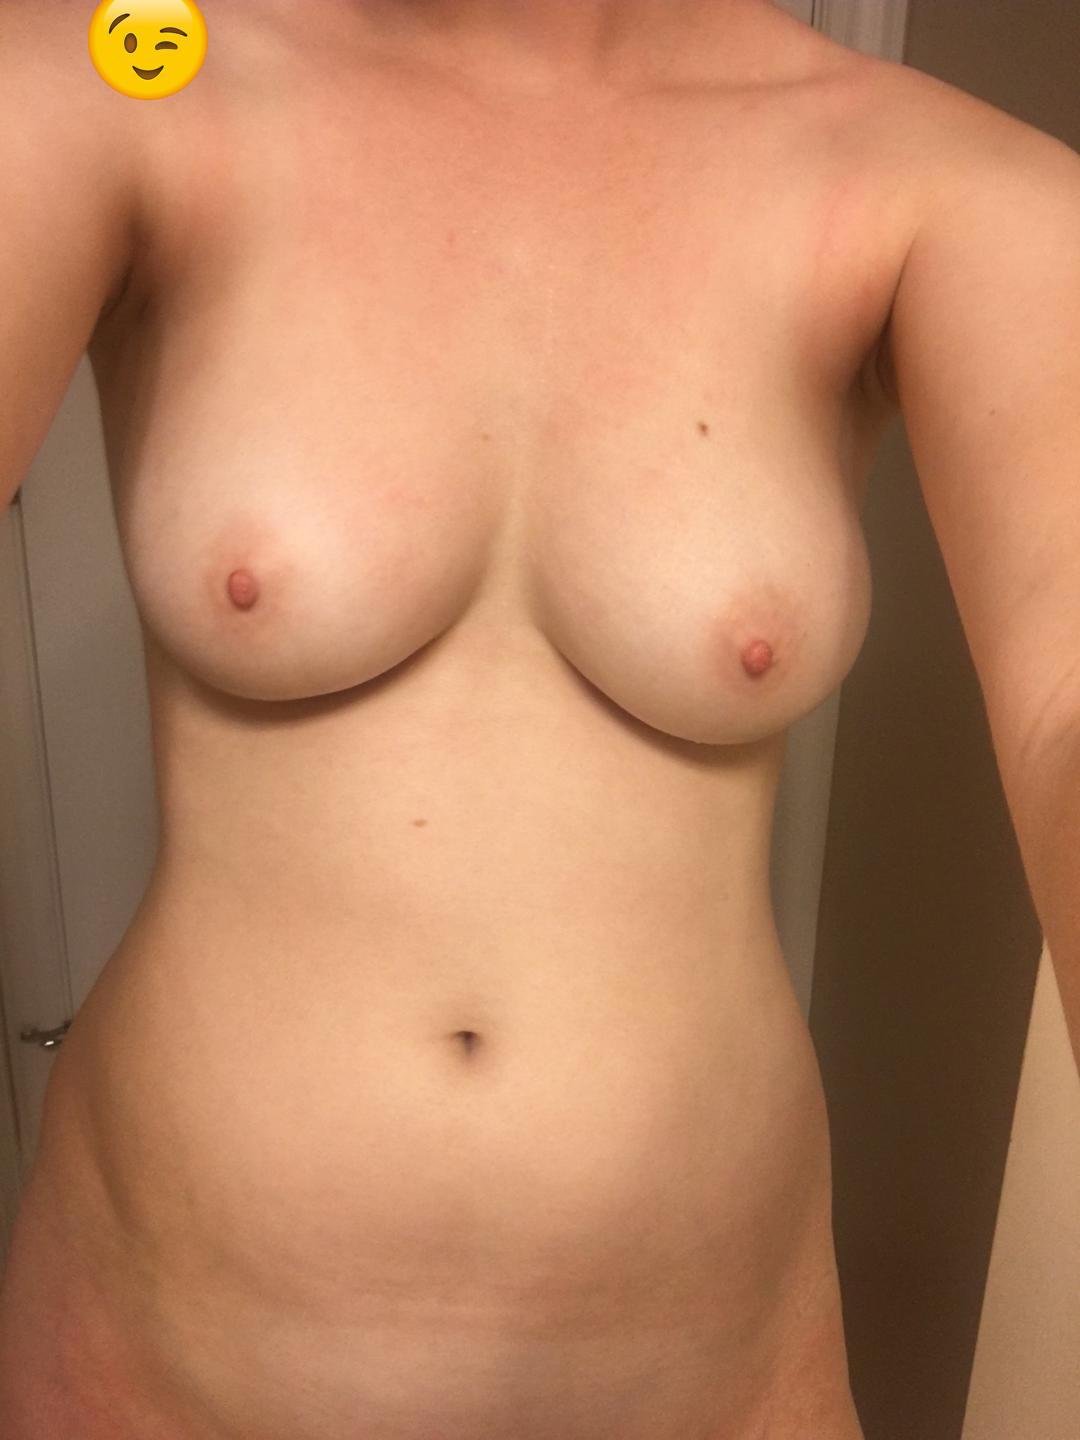 You all are so sexy! I'mew to this, but (f)eel free to comment or PM. ;)